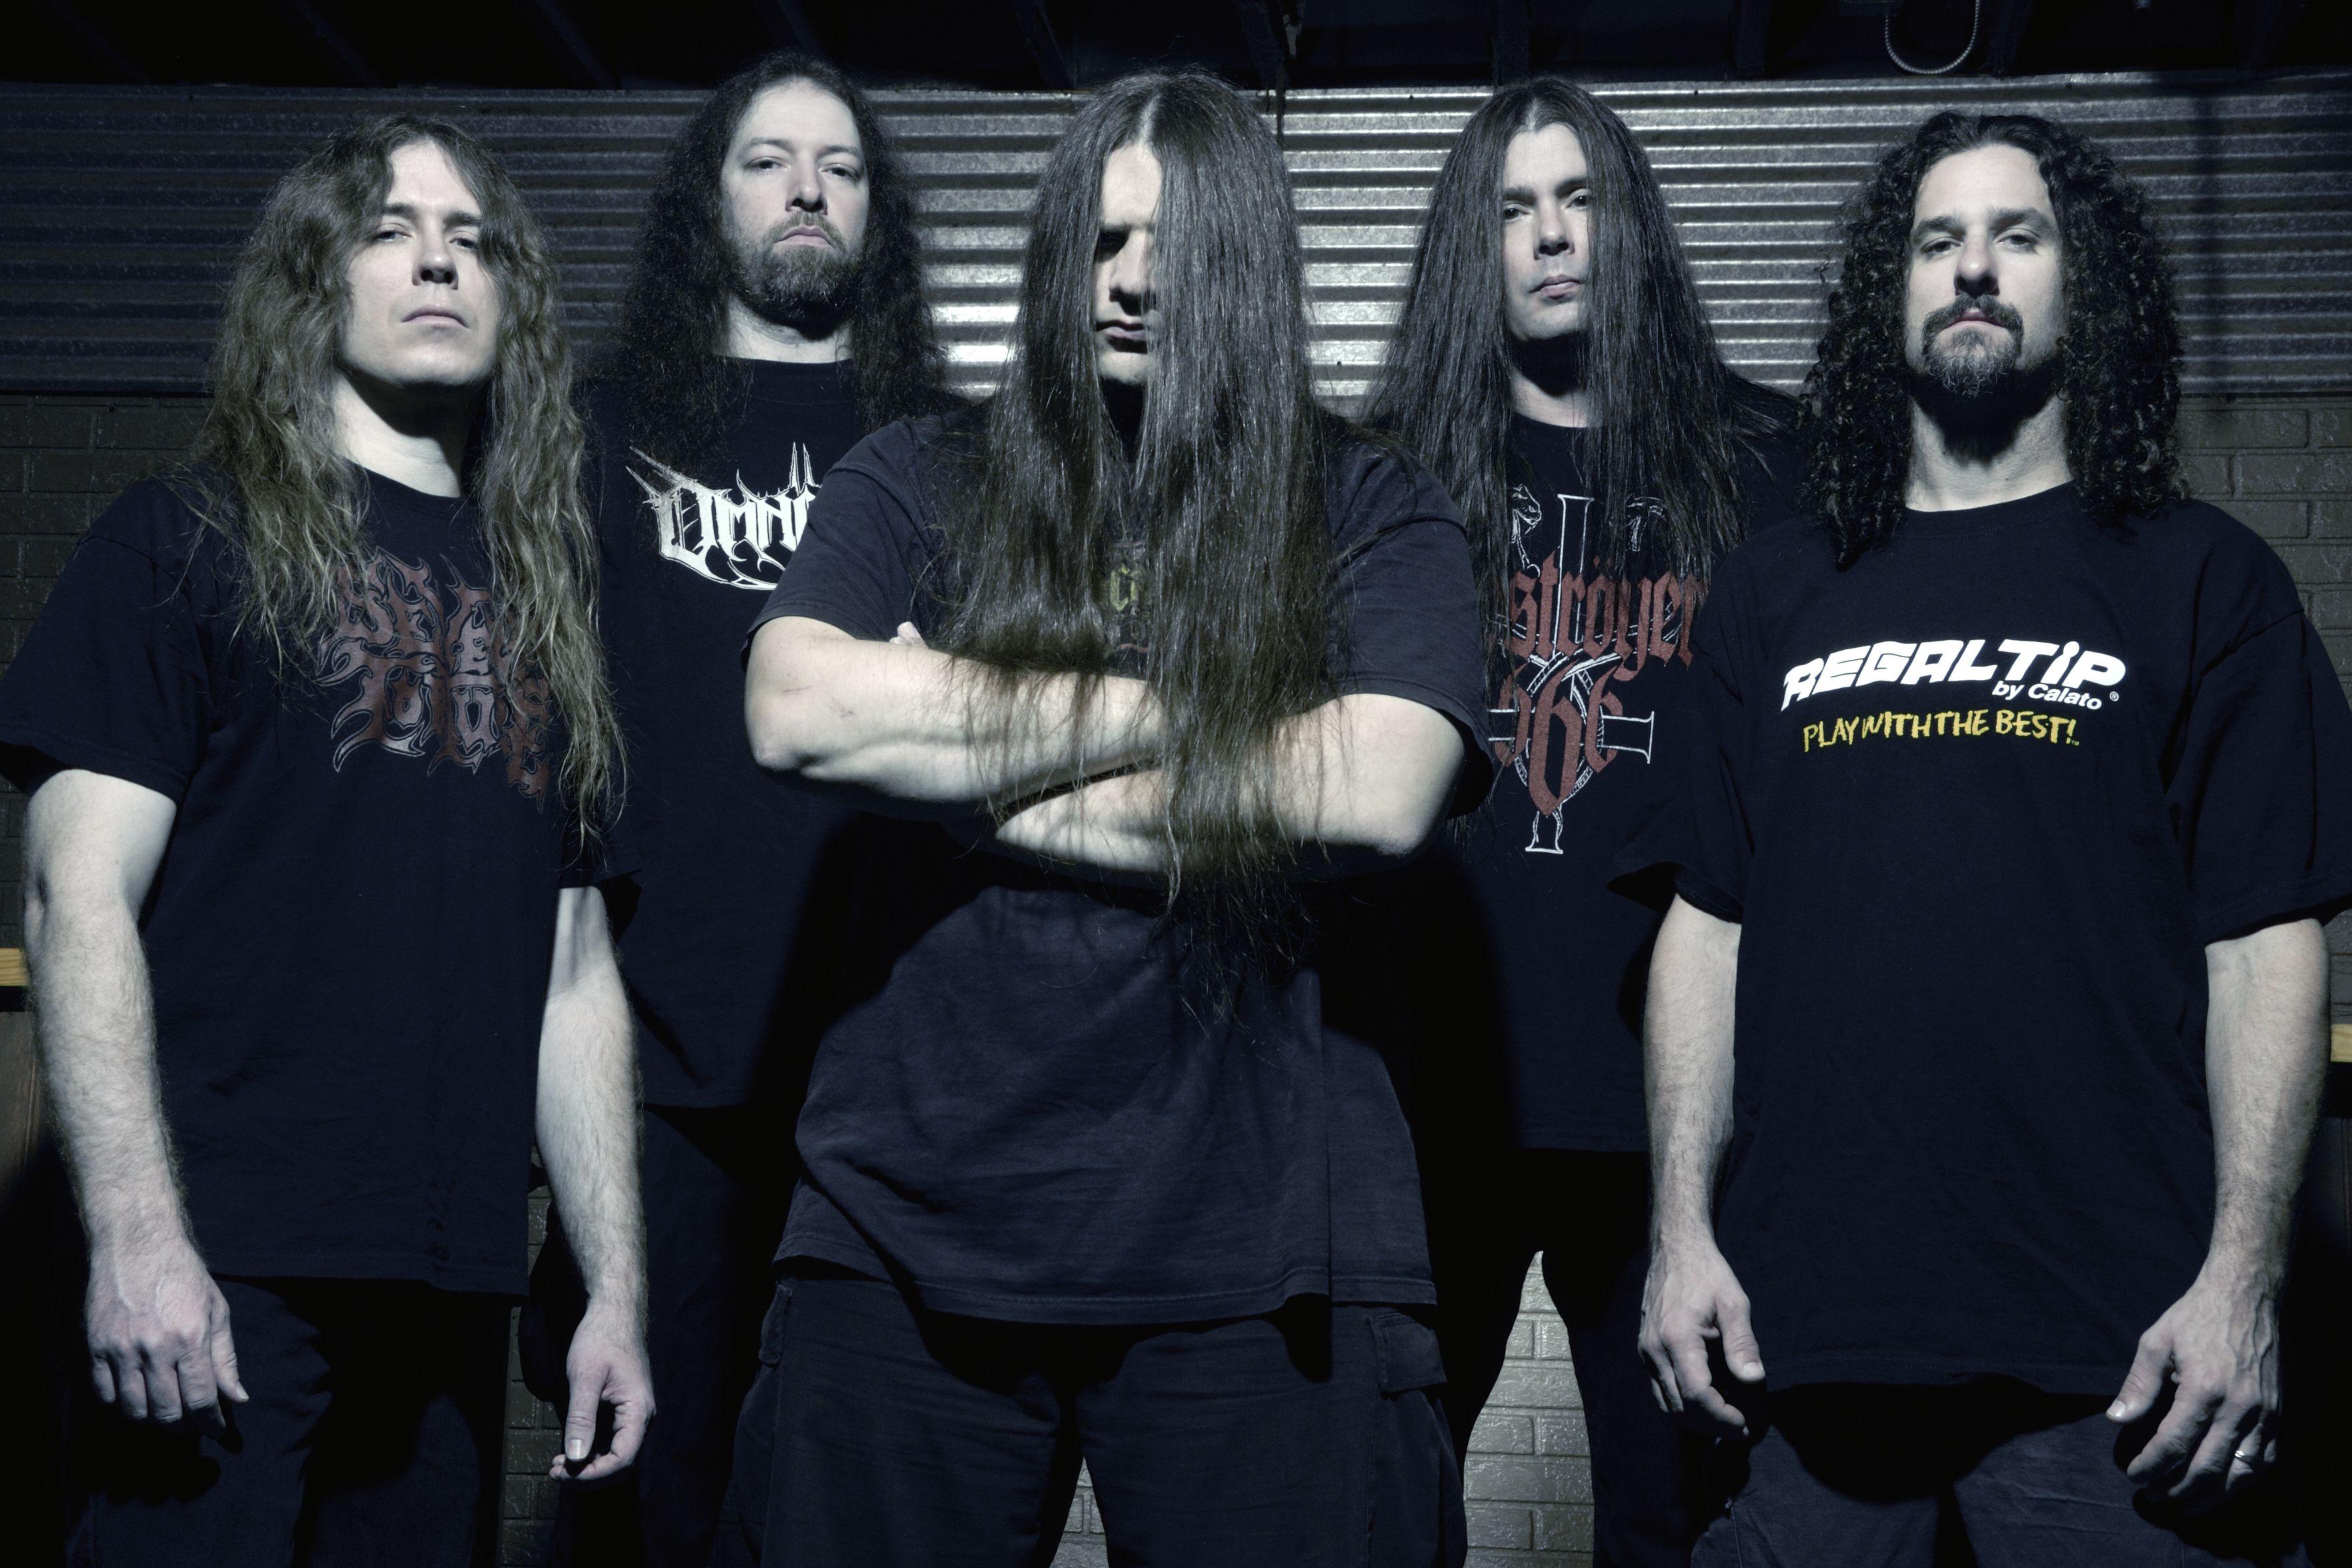 3528x2352px Cannibal Corpse 4543.2 KB